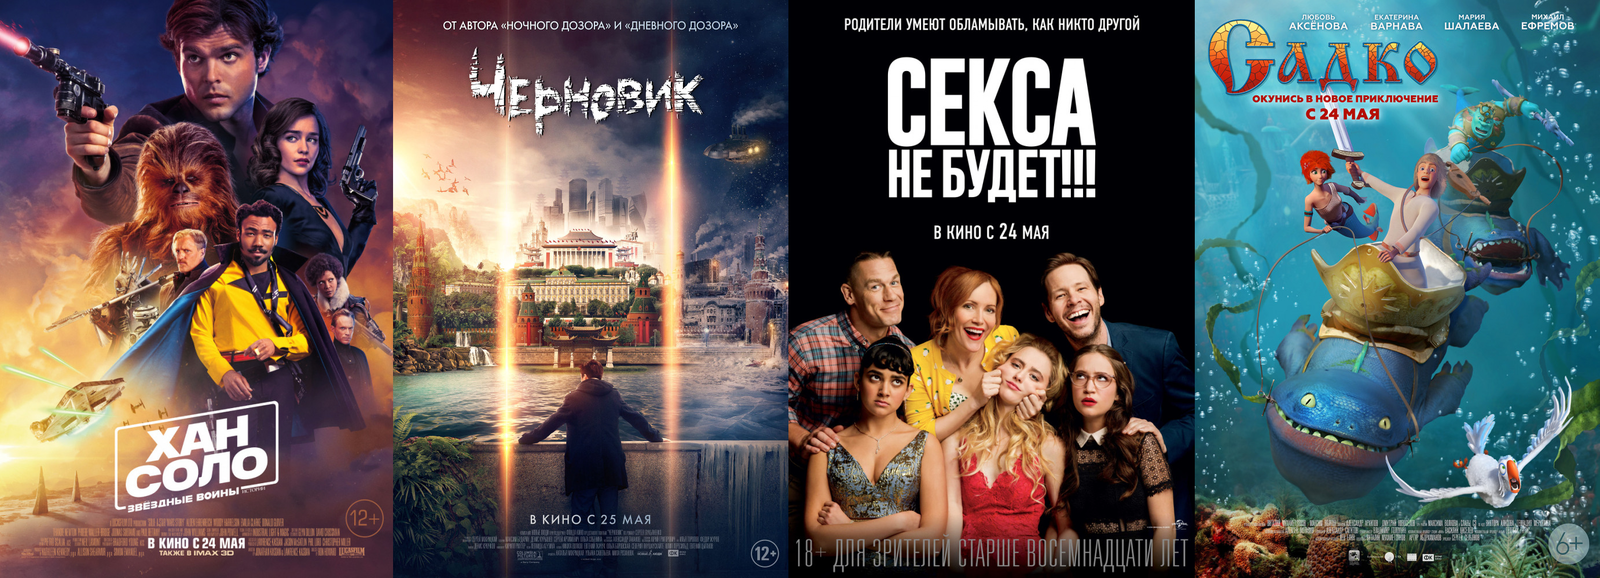 Russian box office receipts and distribution of screenings over the past weekend (May 24 - 27) - Movies, Han Solo, Draft, No sex, Sadko, Box office fees, Film distribution